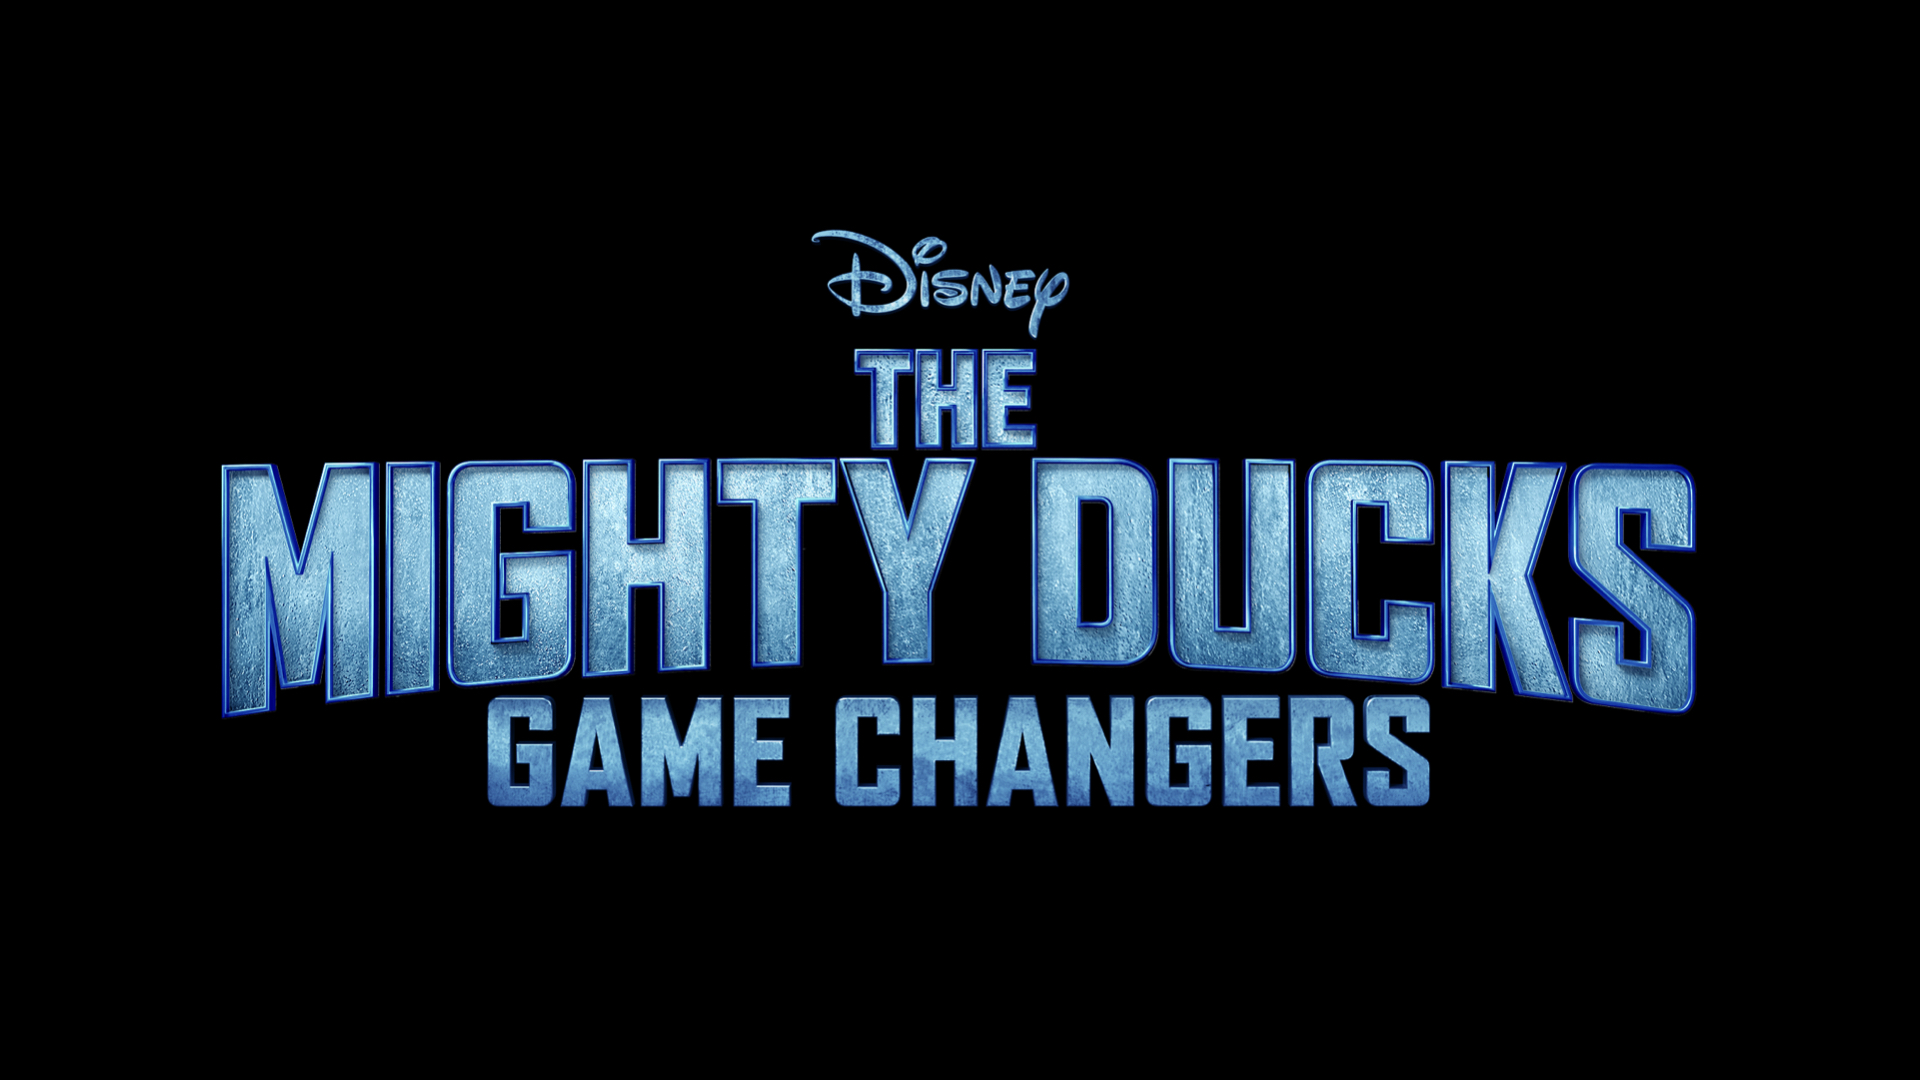 The Mighty Ducks: Game Changers Trailer Shows Plenty of Love for Fun and Hockey